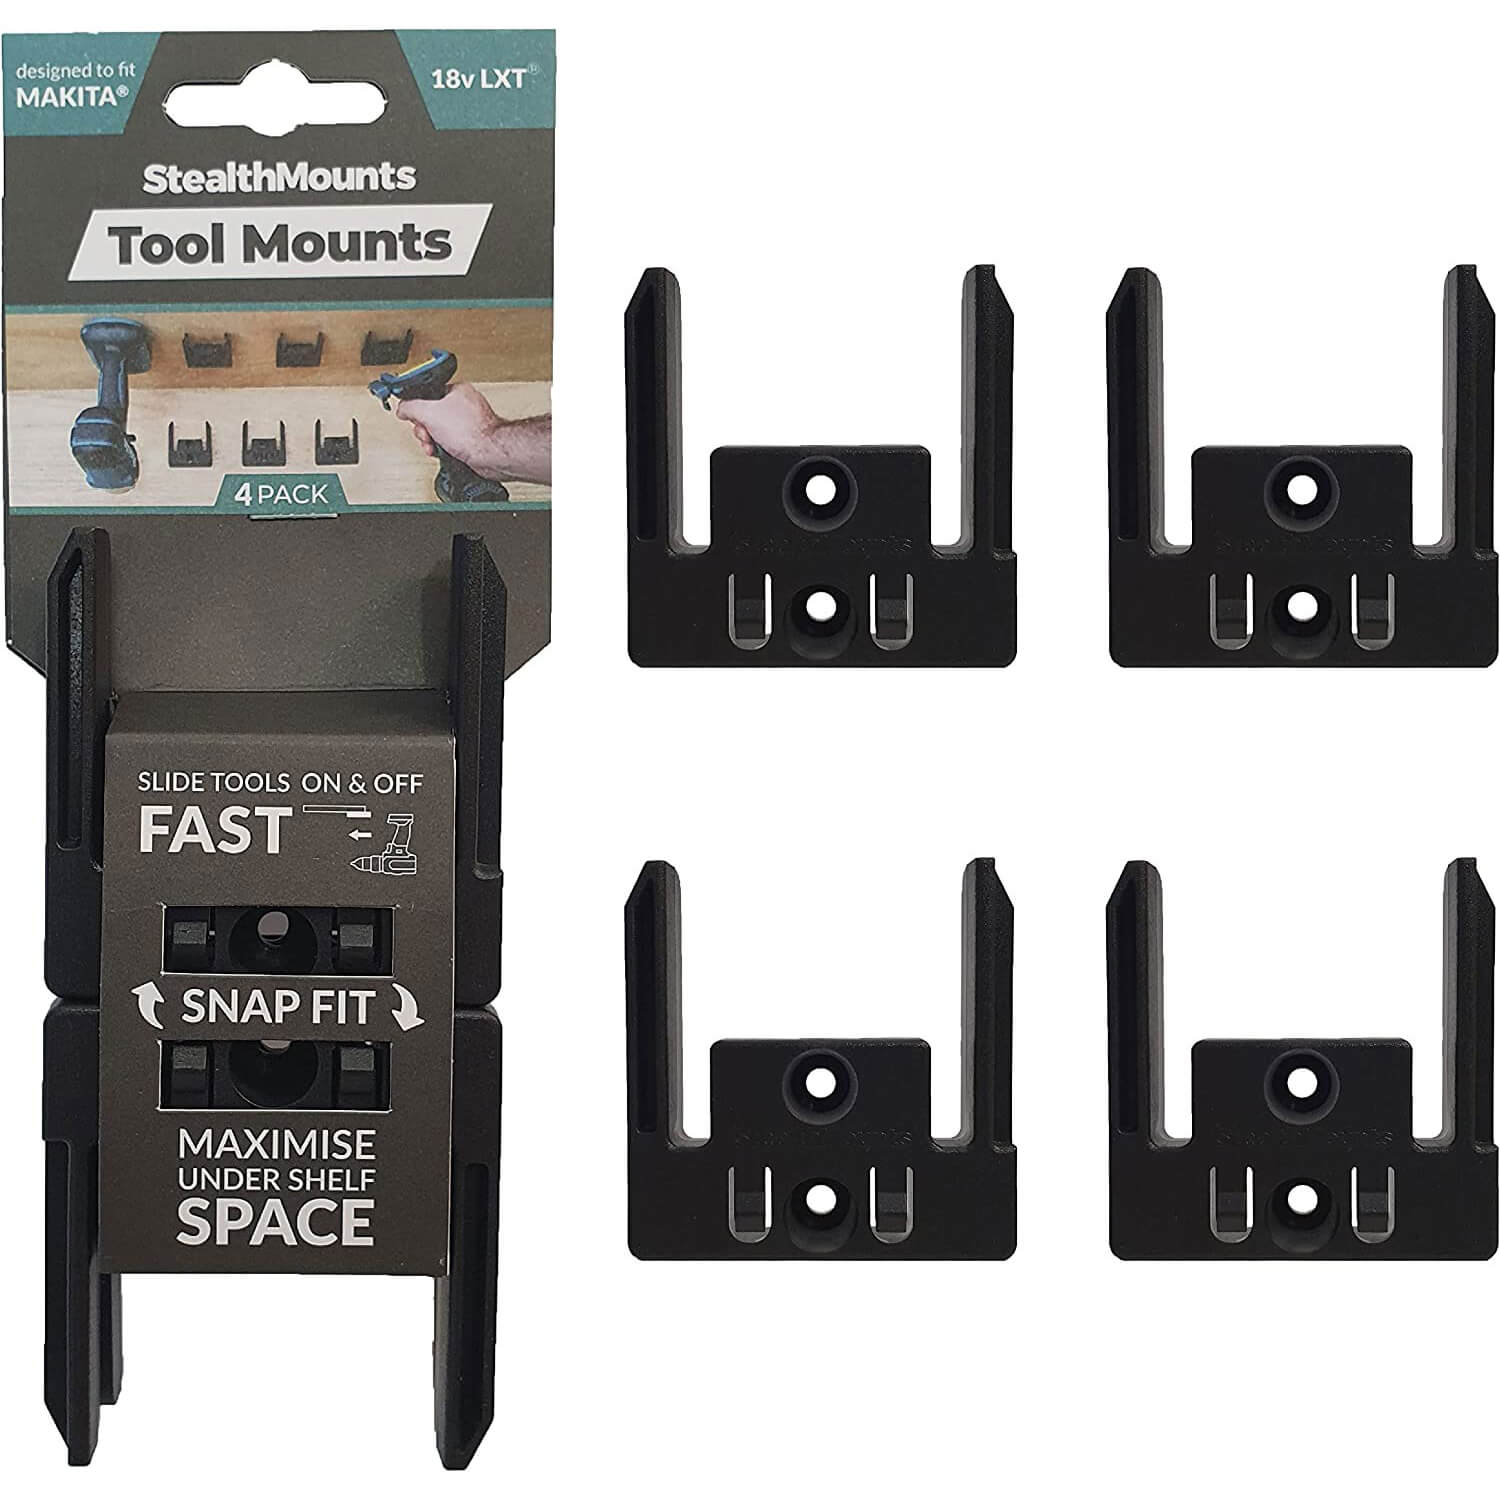 Image of Stealth Mounts 4 Pack Tool Mounts For Makita 18V LXT Tools Black